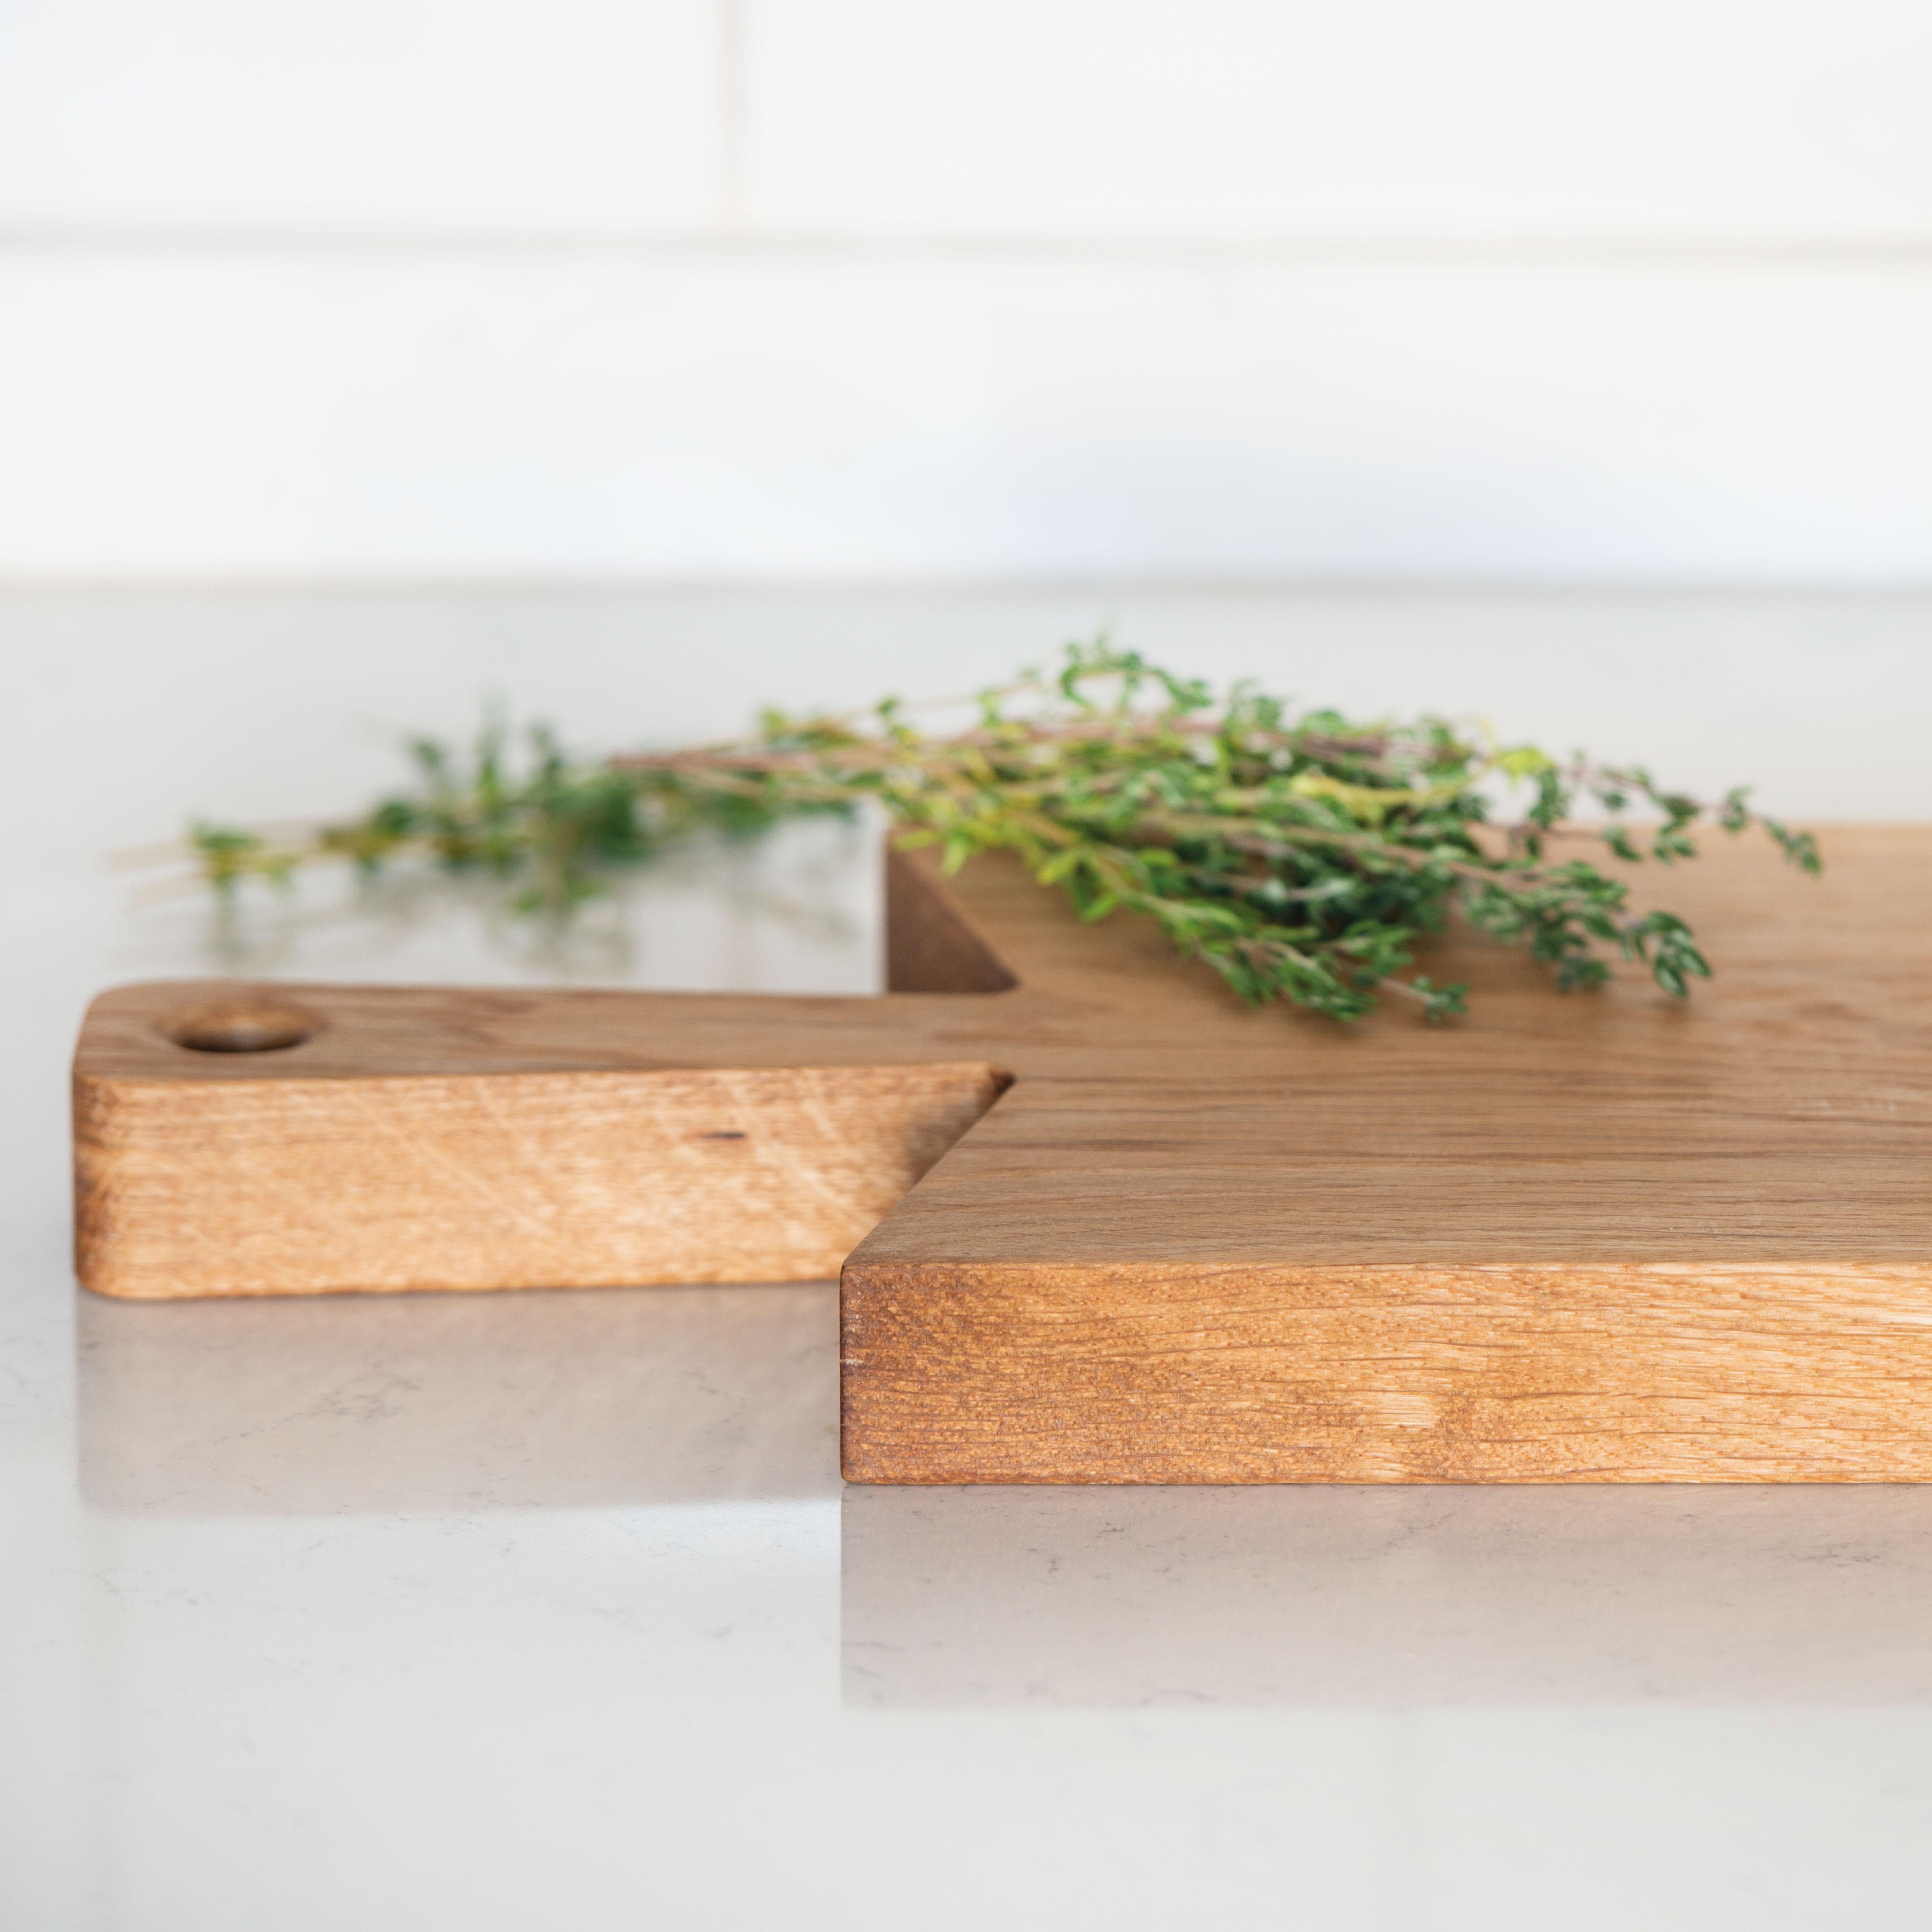 Chop is with you in preparing food in your kitchen. It is ergonomically redefined from a Classic cutting/chopping board. Durable and long-lasting. Each tree is different in pattern, texture, color tone, and vascular structure. This difference allows